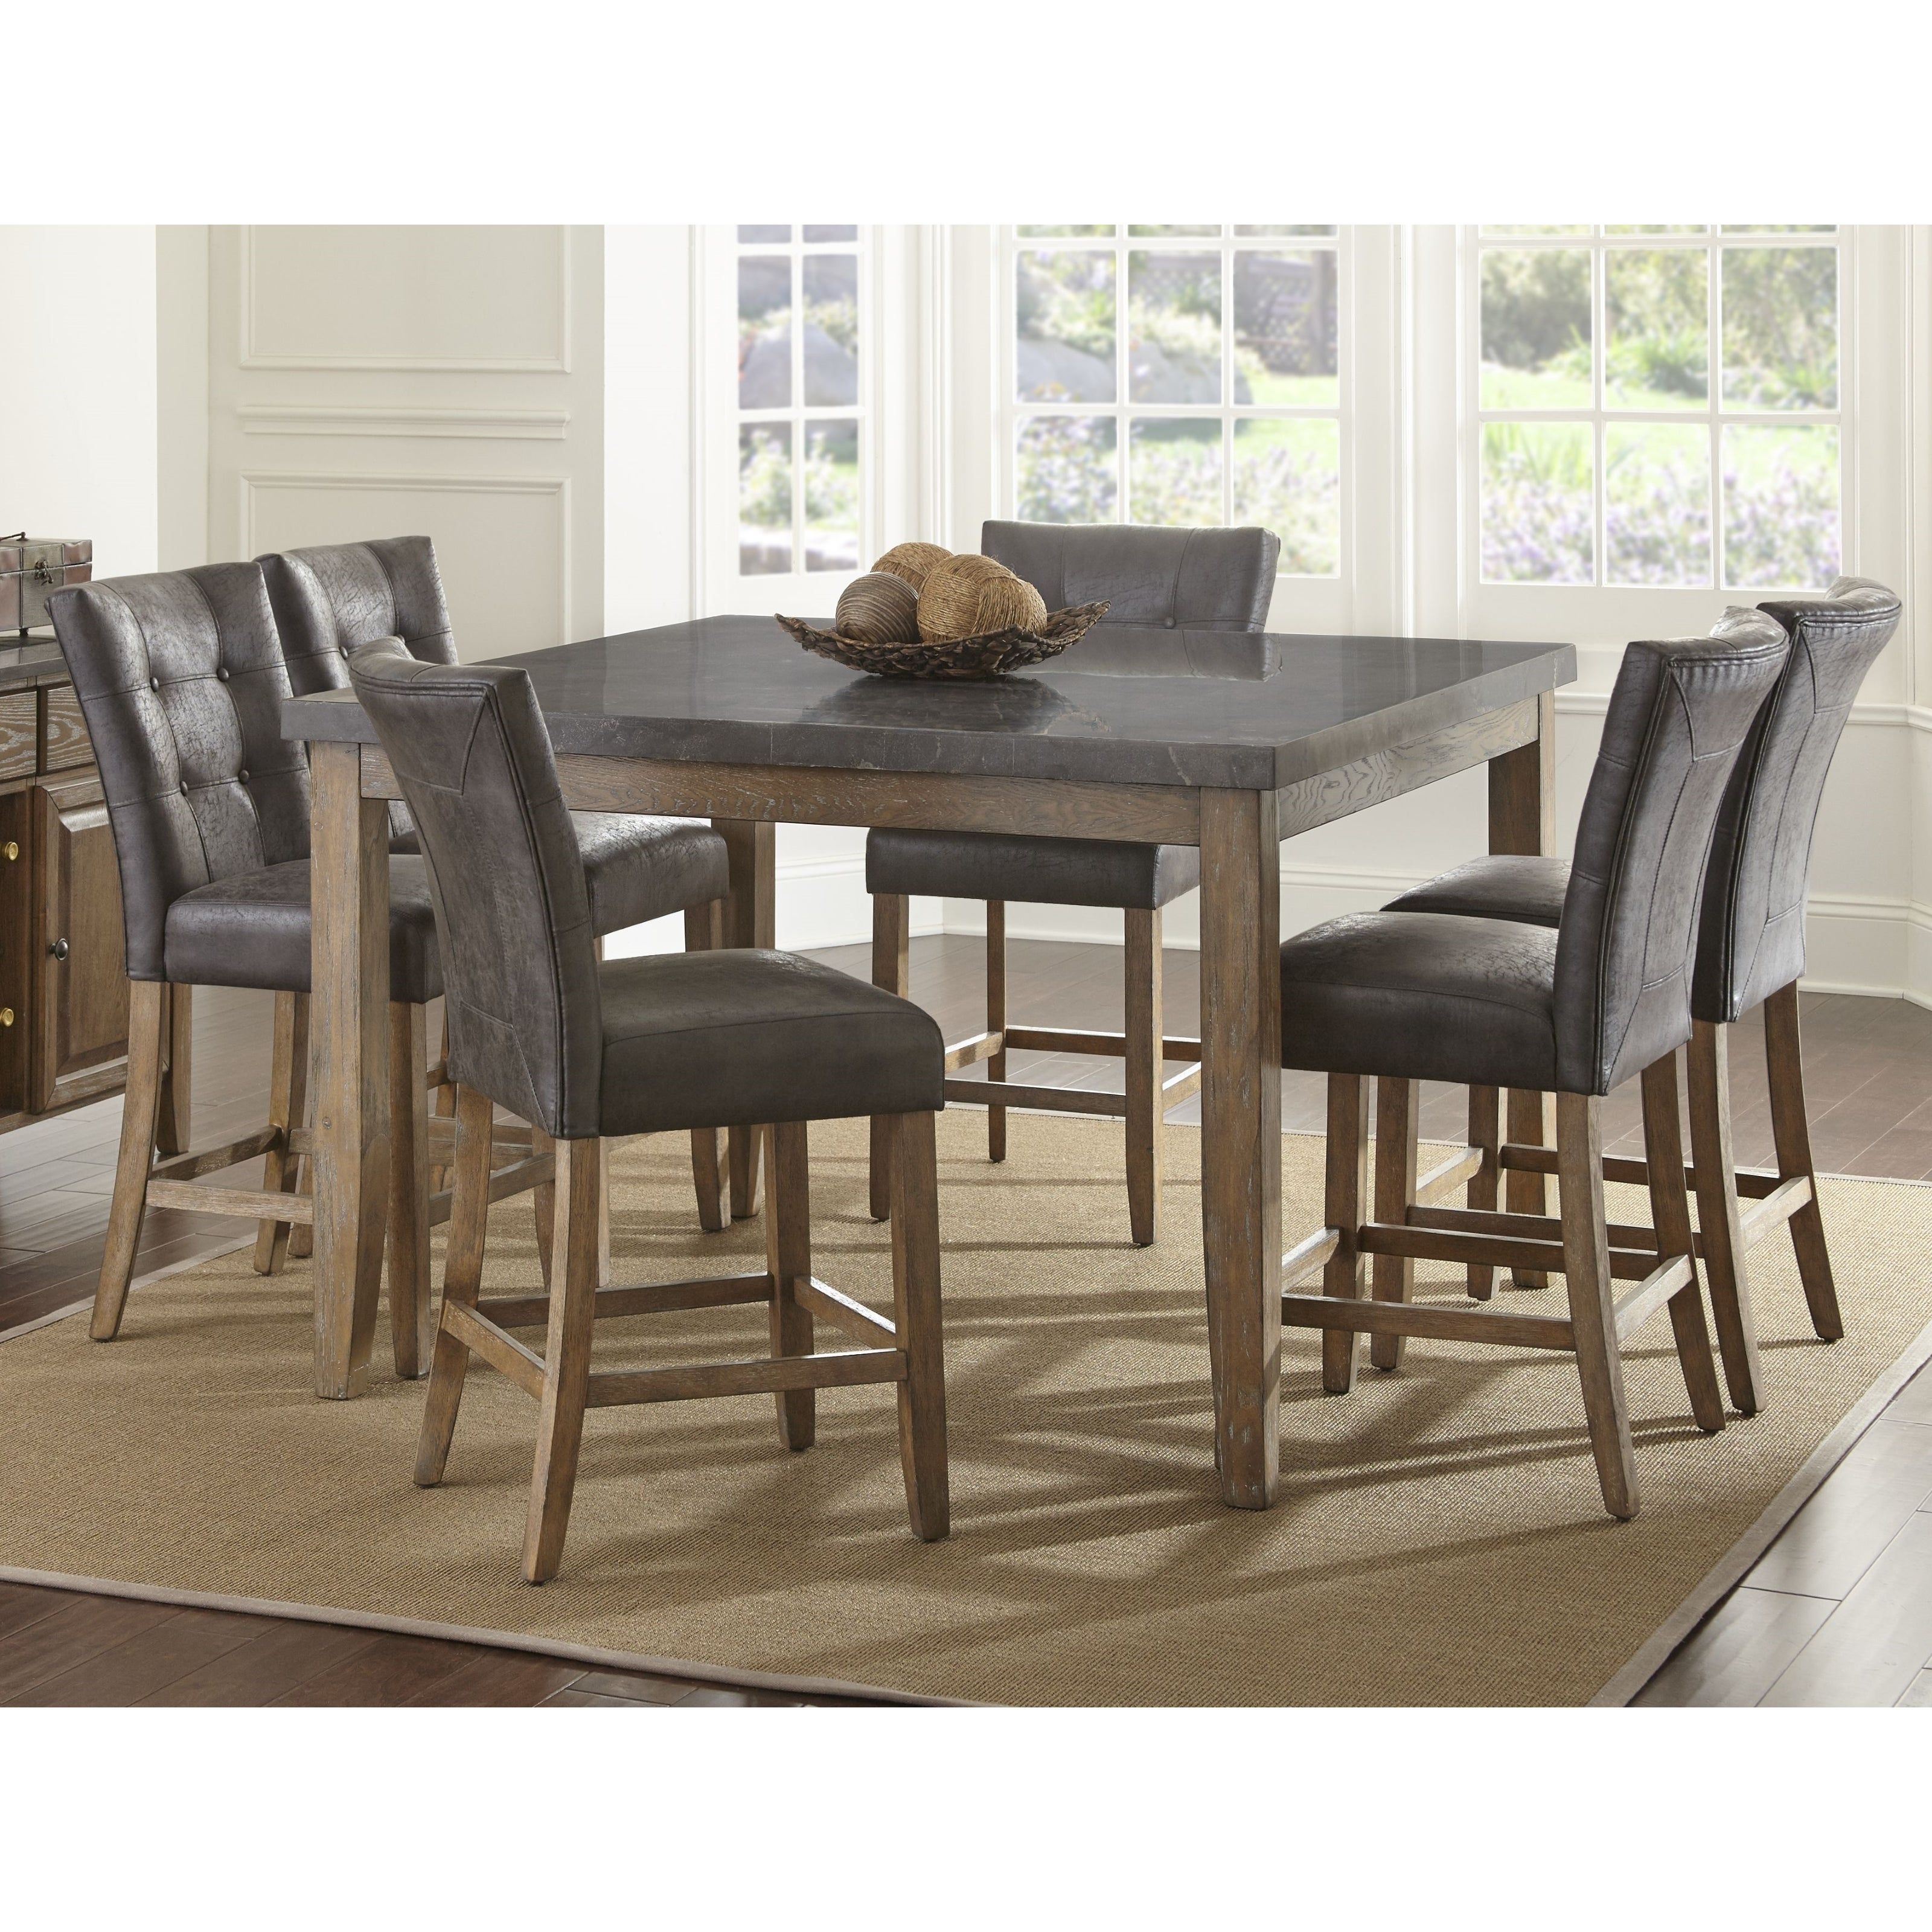 Widely Used Buy 5 Piece Sets Kitchen & Dining Room Sets Online At Overstock With Regard To West Hill Family Table 3 Piece Dining Sets (View 15 of 20)